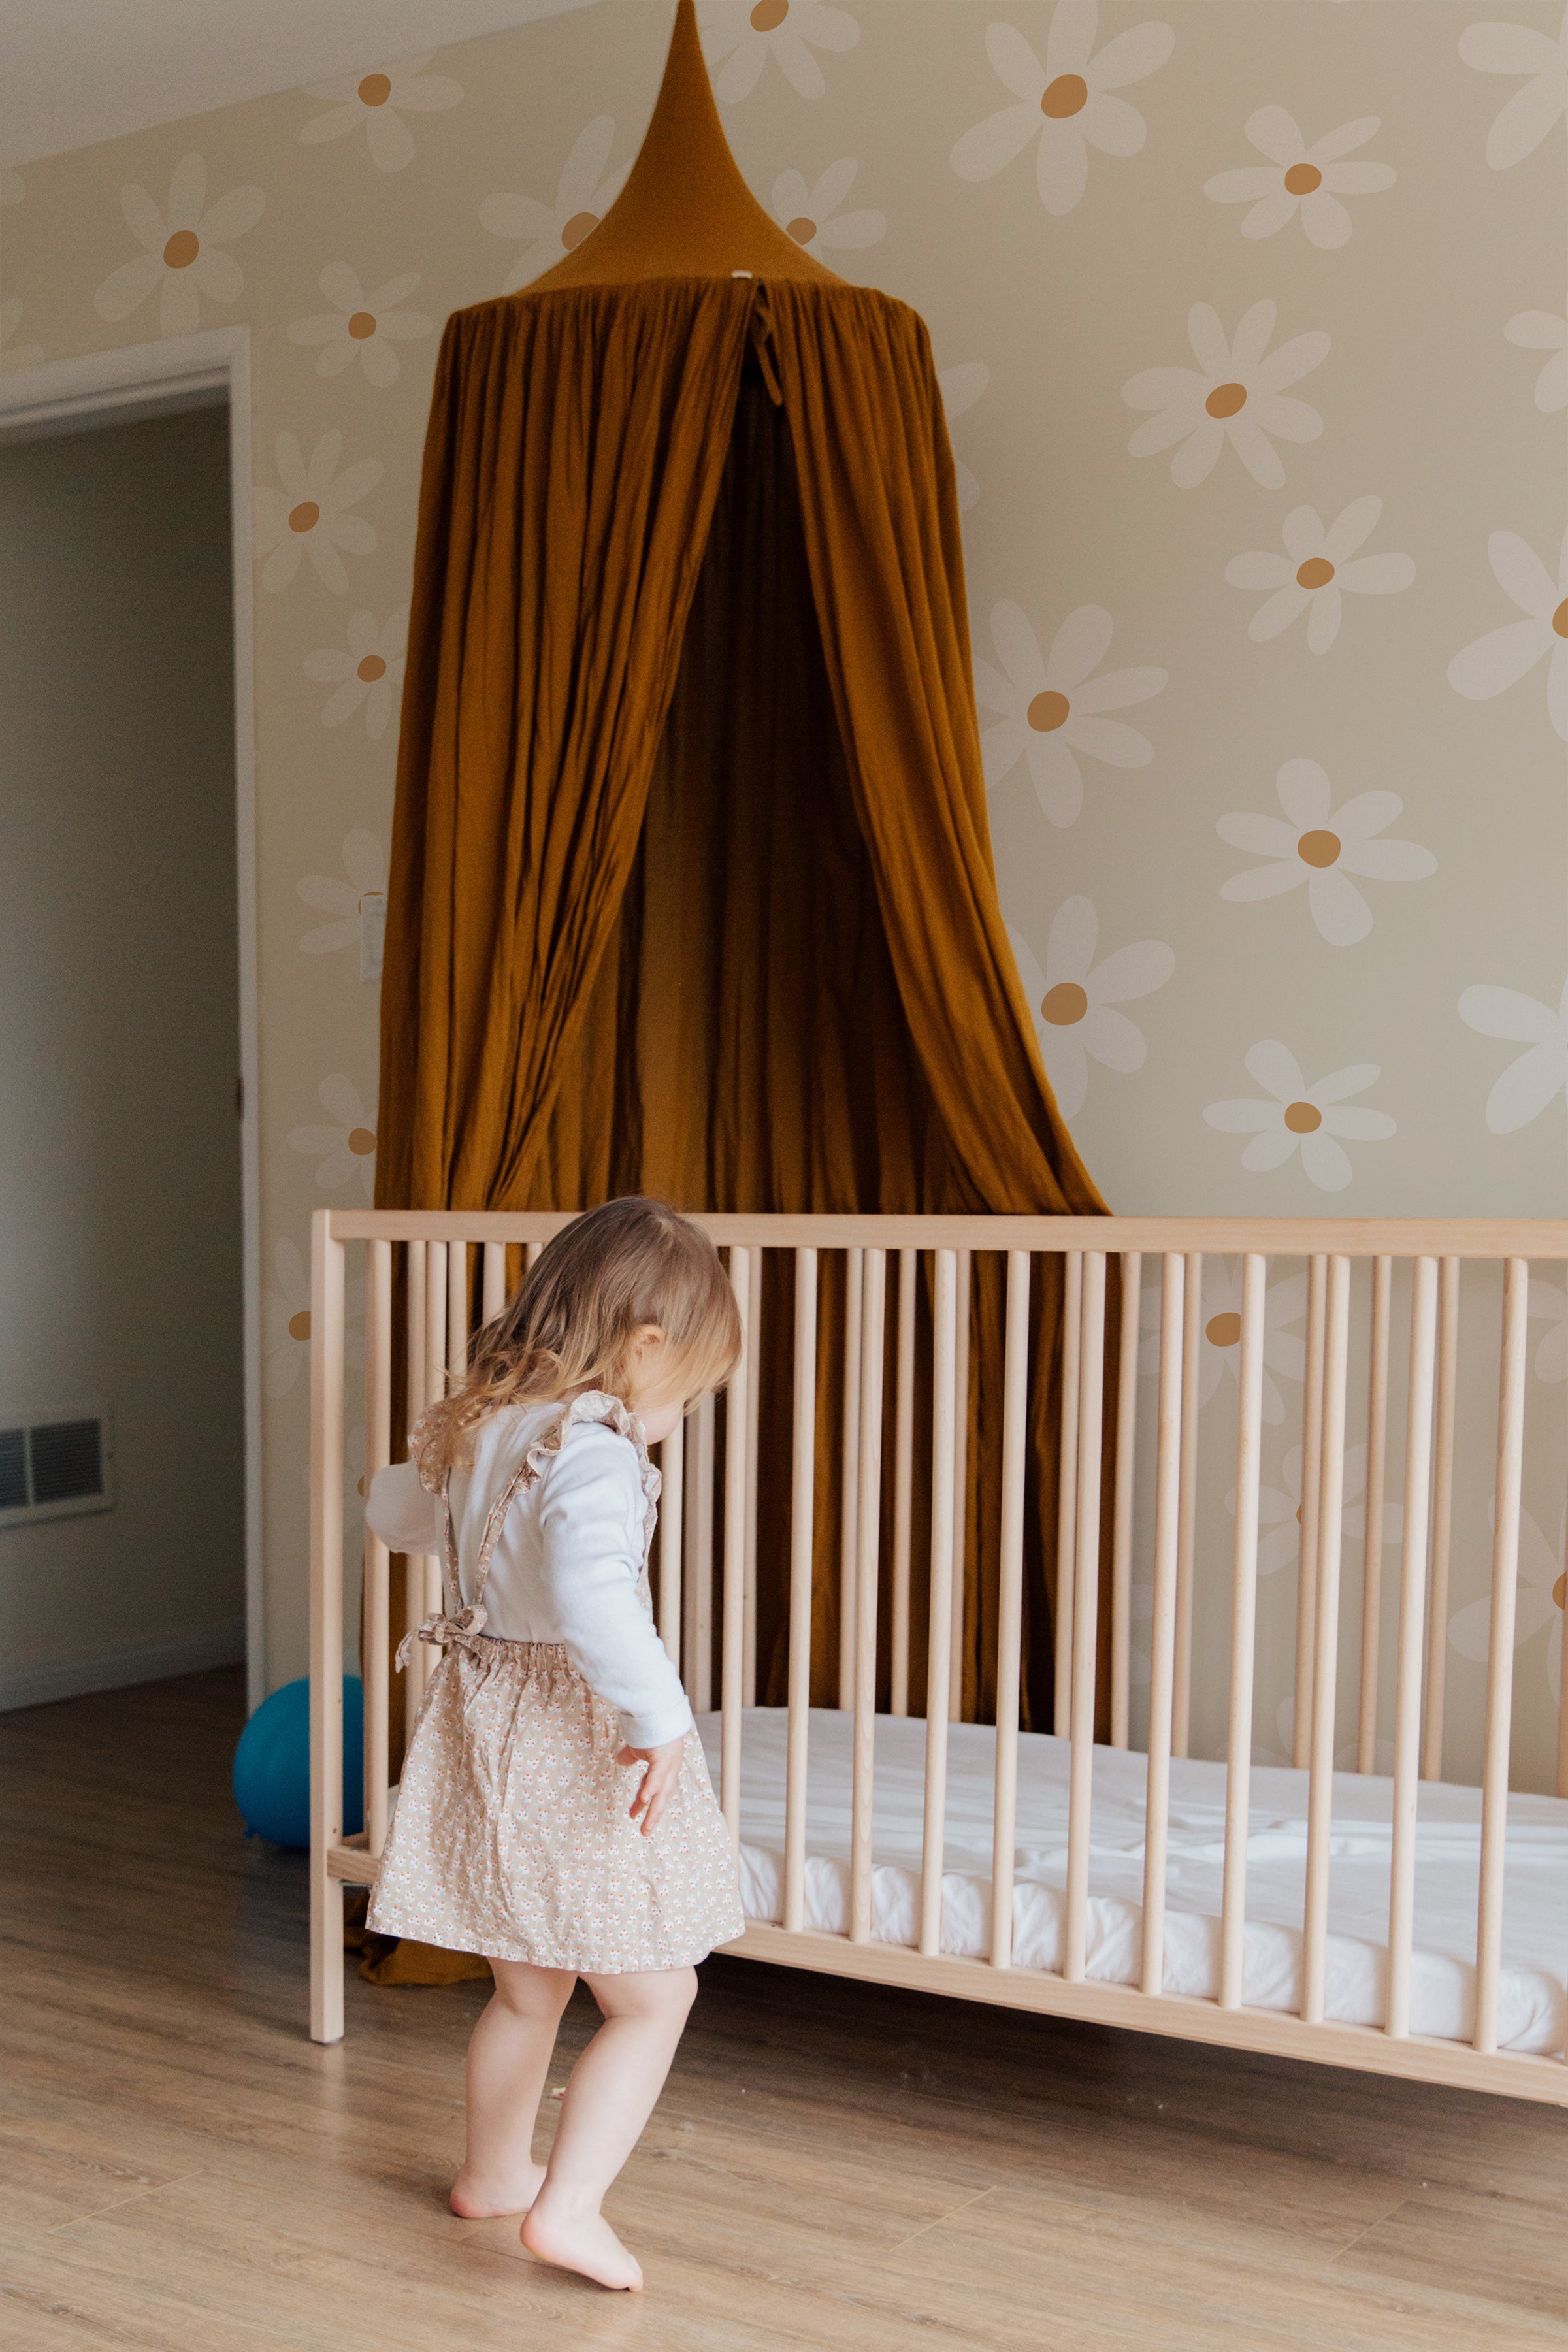 A child's nursery room with a wall adorned with Simple Daisy Wallpaper, featuring large white daisies with golden centers on a soft ecru background. A little girl in a white blouse and patterned skirt stands beside a wooden crib, beneath a mustard-colored canopy.